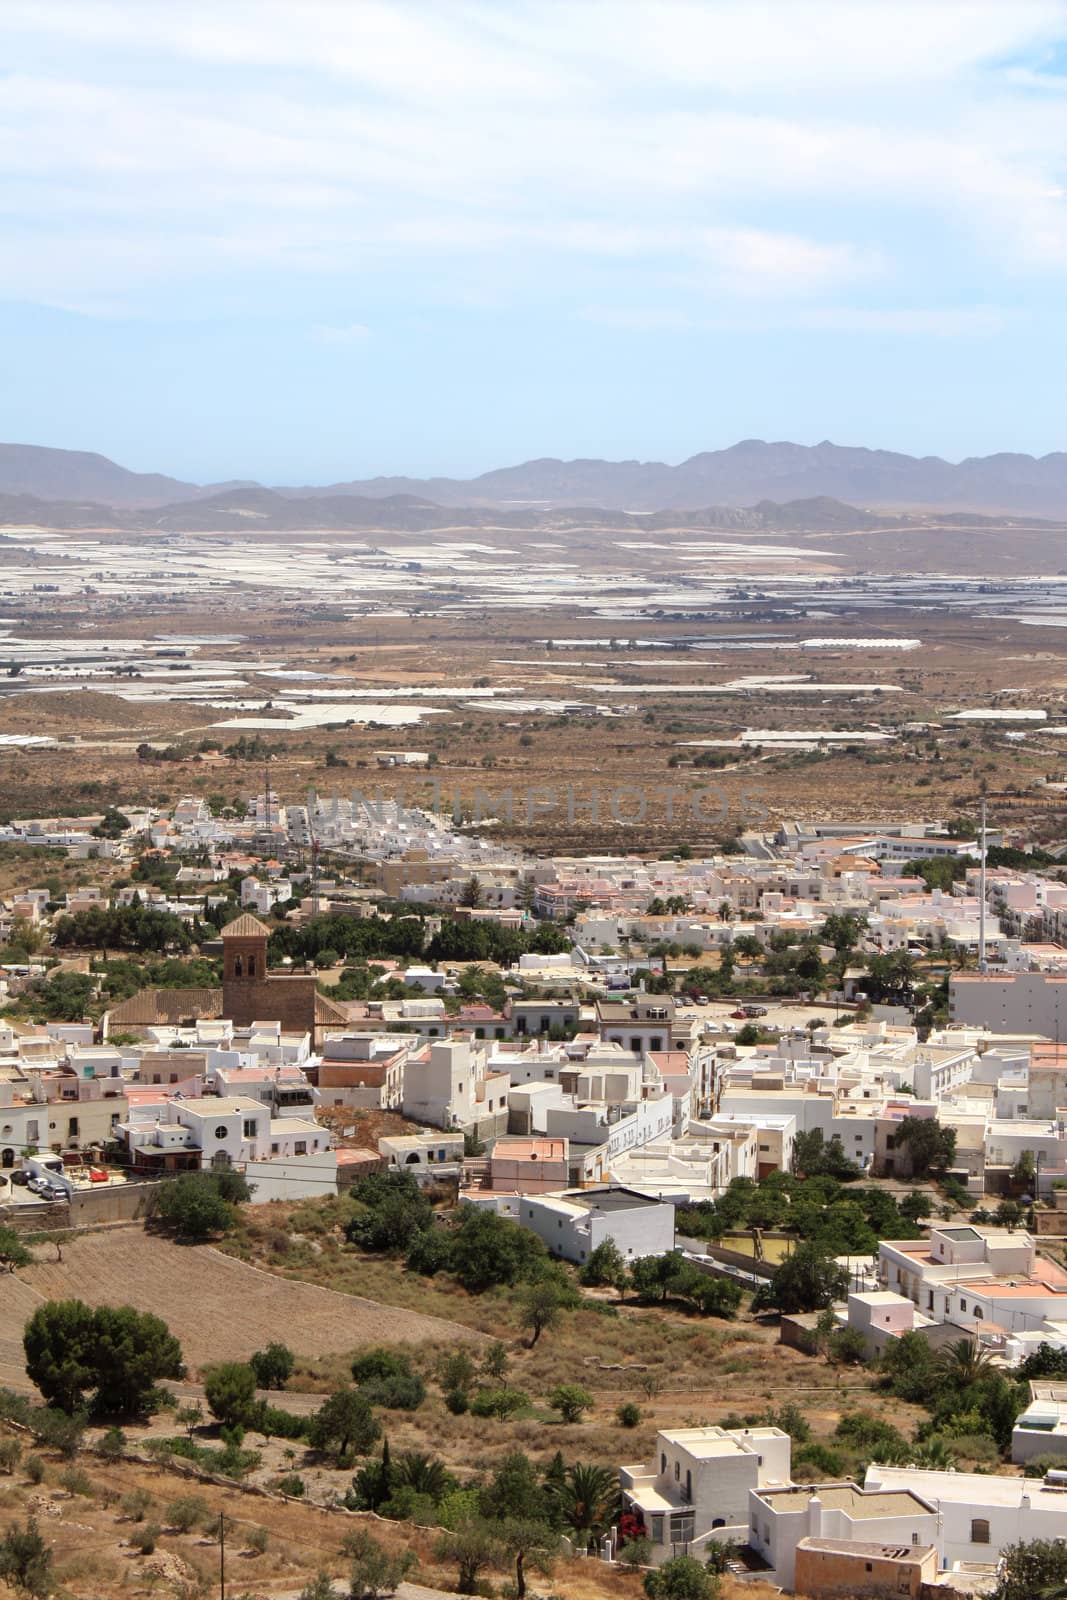 Bird's eye view of Nijar, a typical whitewashed Andalusian village in the province of Almeria, Spain, with greenhouses in the background.